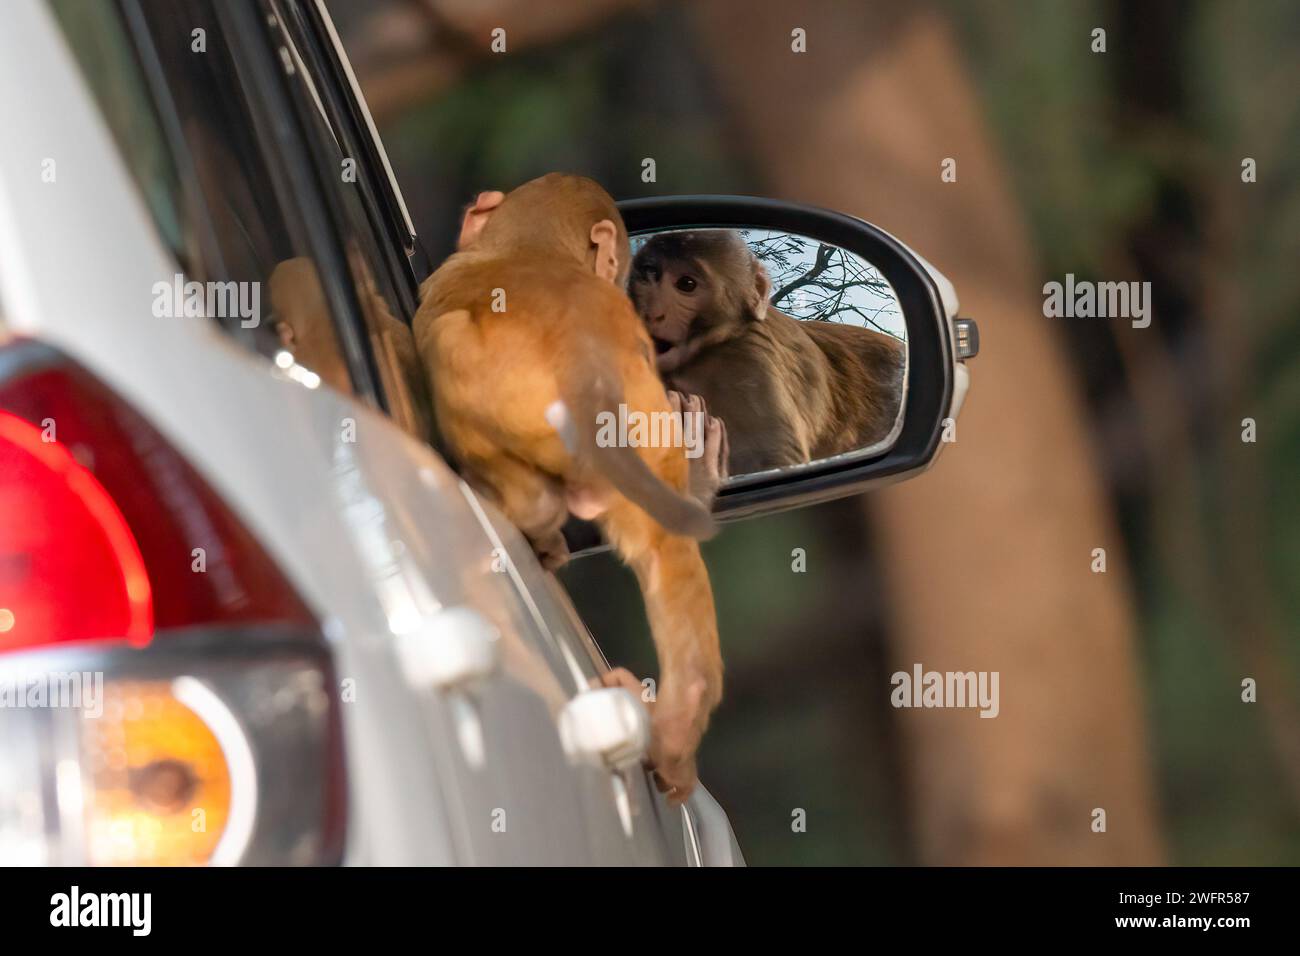 Shocked by its own reflection CHANDIGARH, INDIA ADORABLE IMAGES show a monkey who cannot quite believe it has a reflection navigating the confusion. Stock Photo